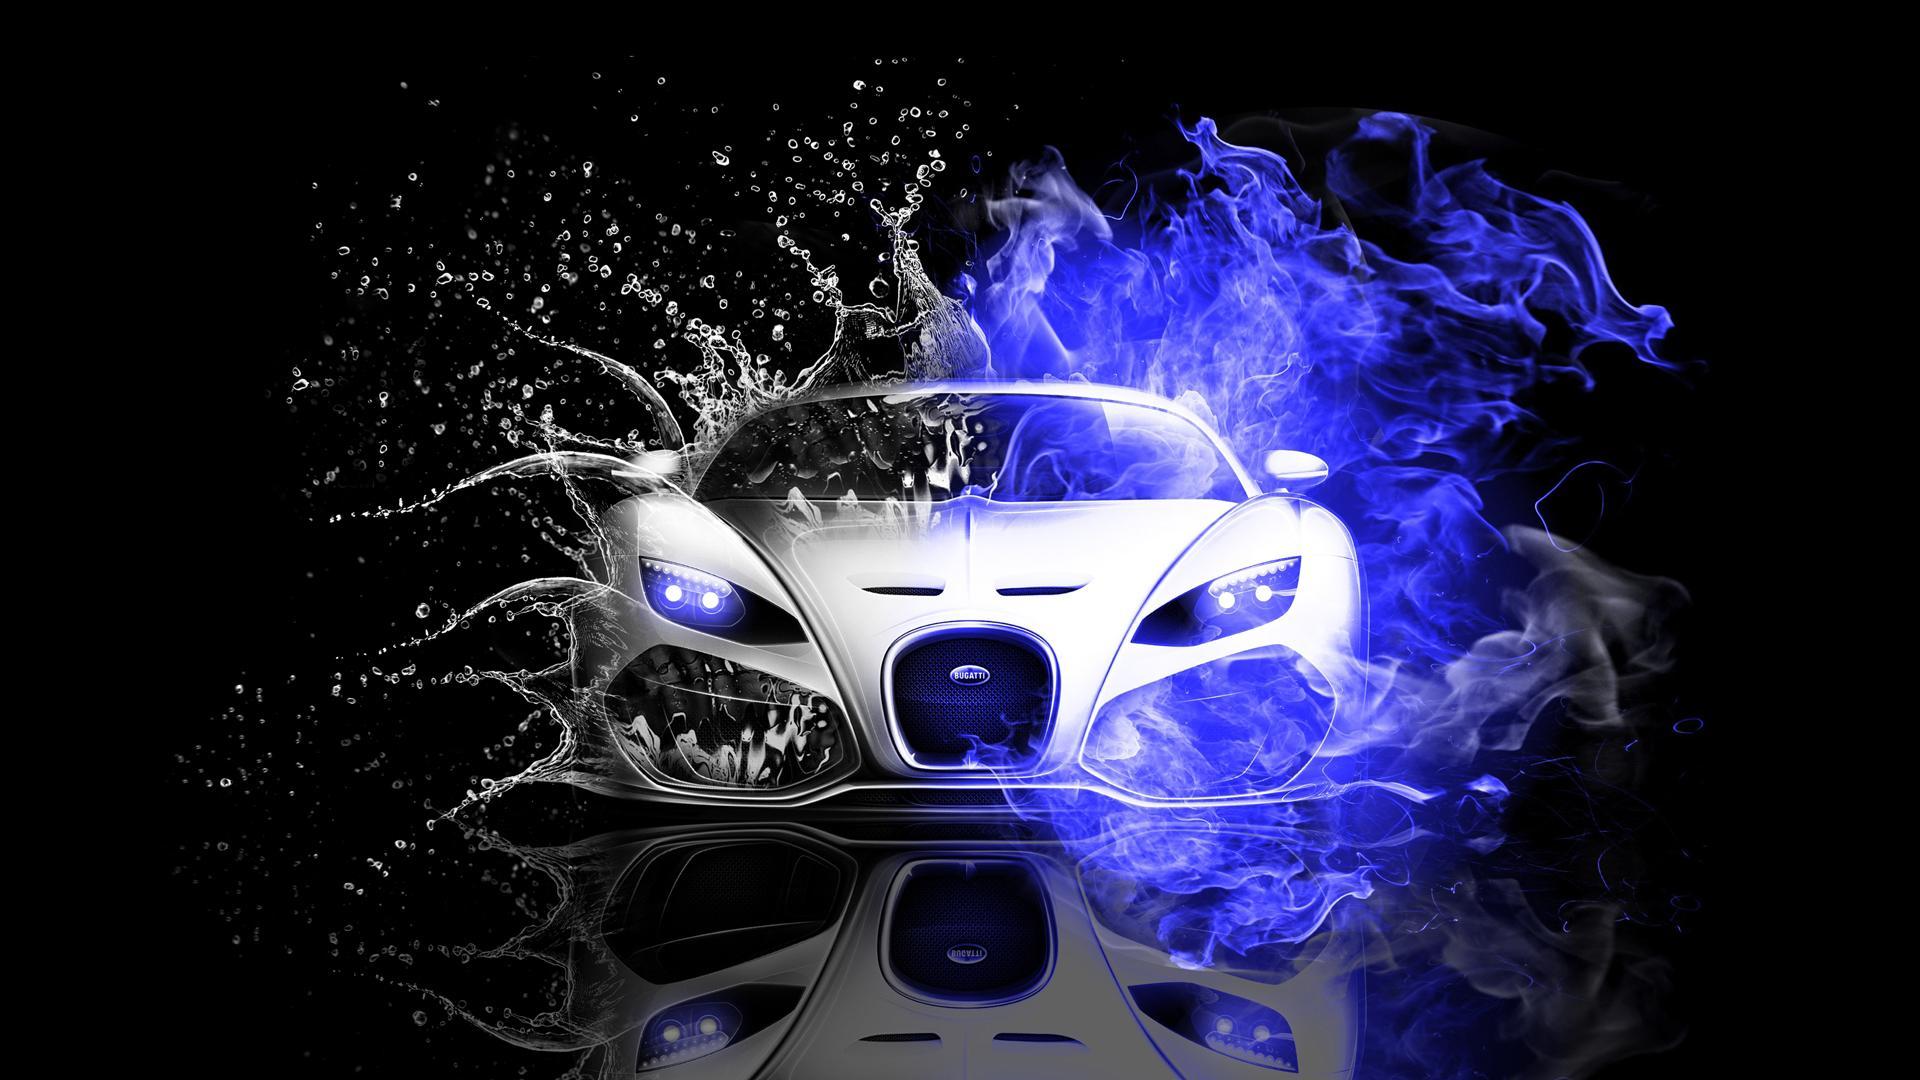 Fast Car Wallpaper For Iphone 5